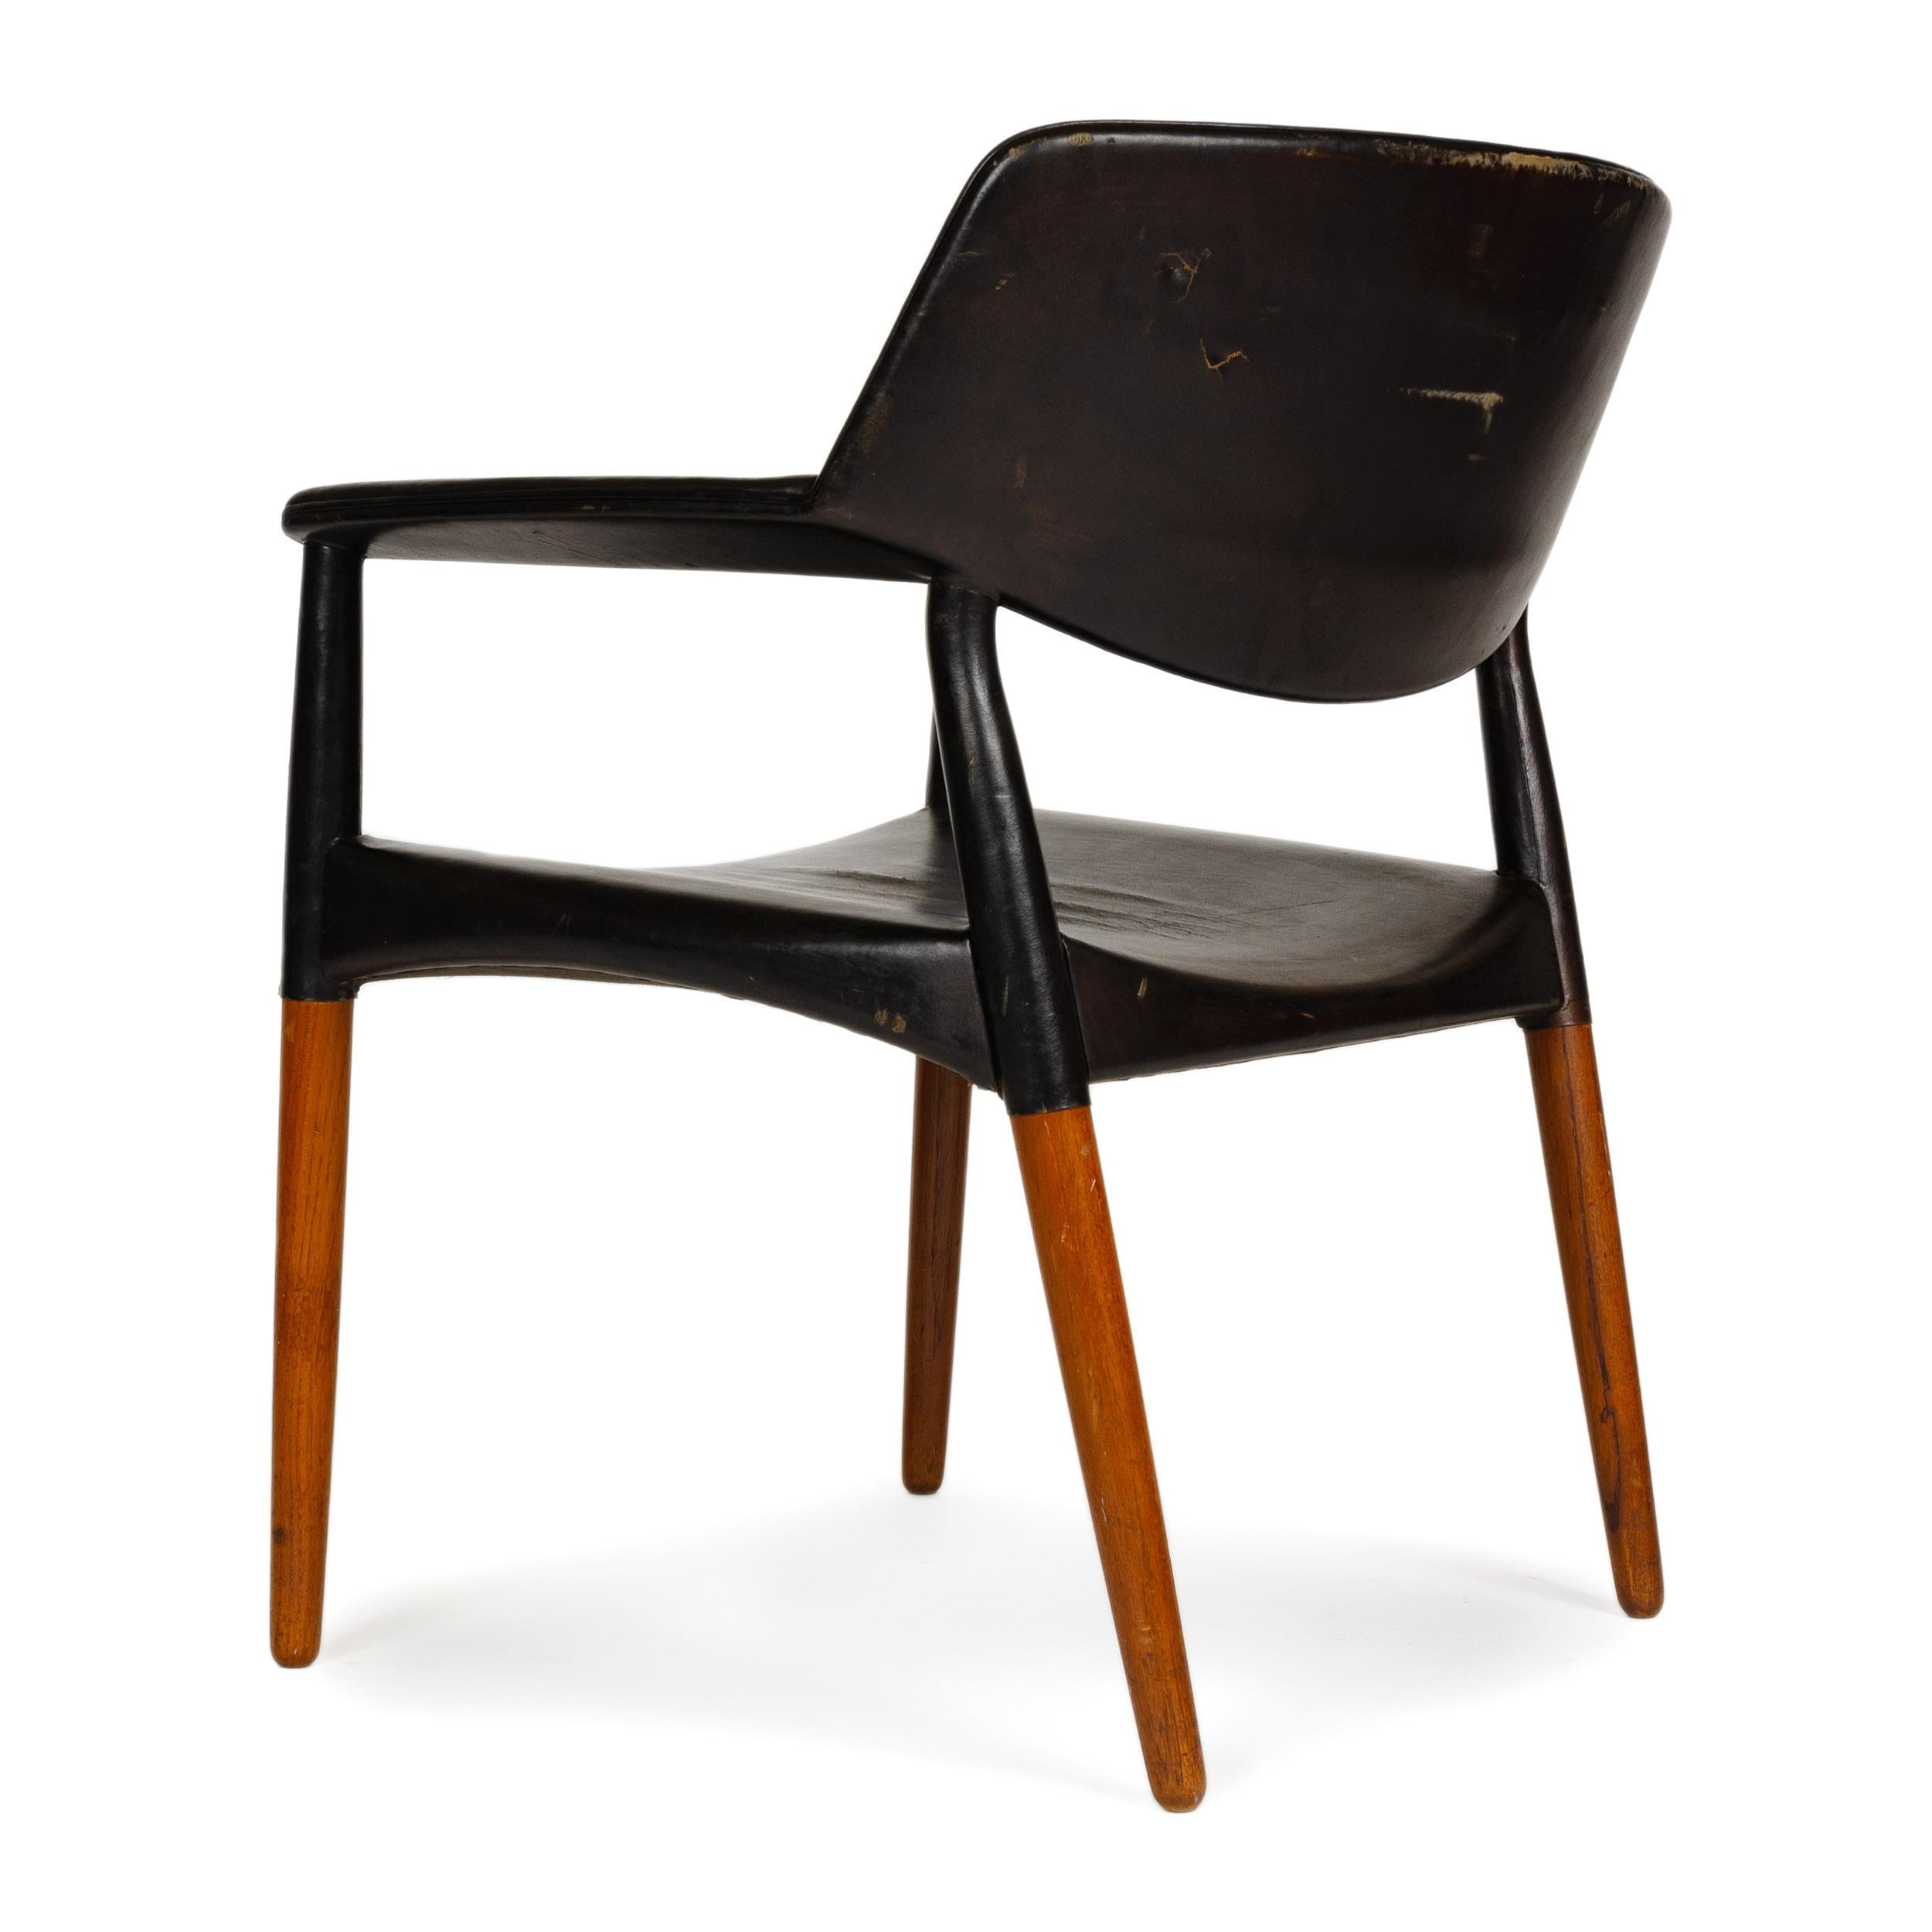 1960s Danish Teak Armchair by Ejner Larsen & Aksel Bender Madsen for Willy Beck In Good Condition For Sale In Sagaponack, NY